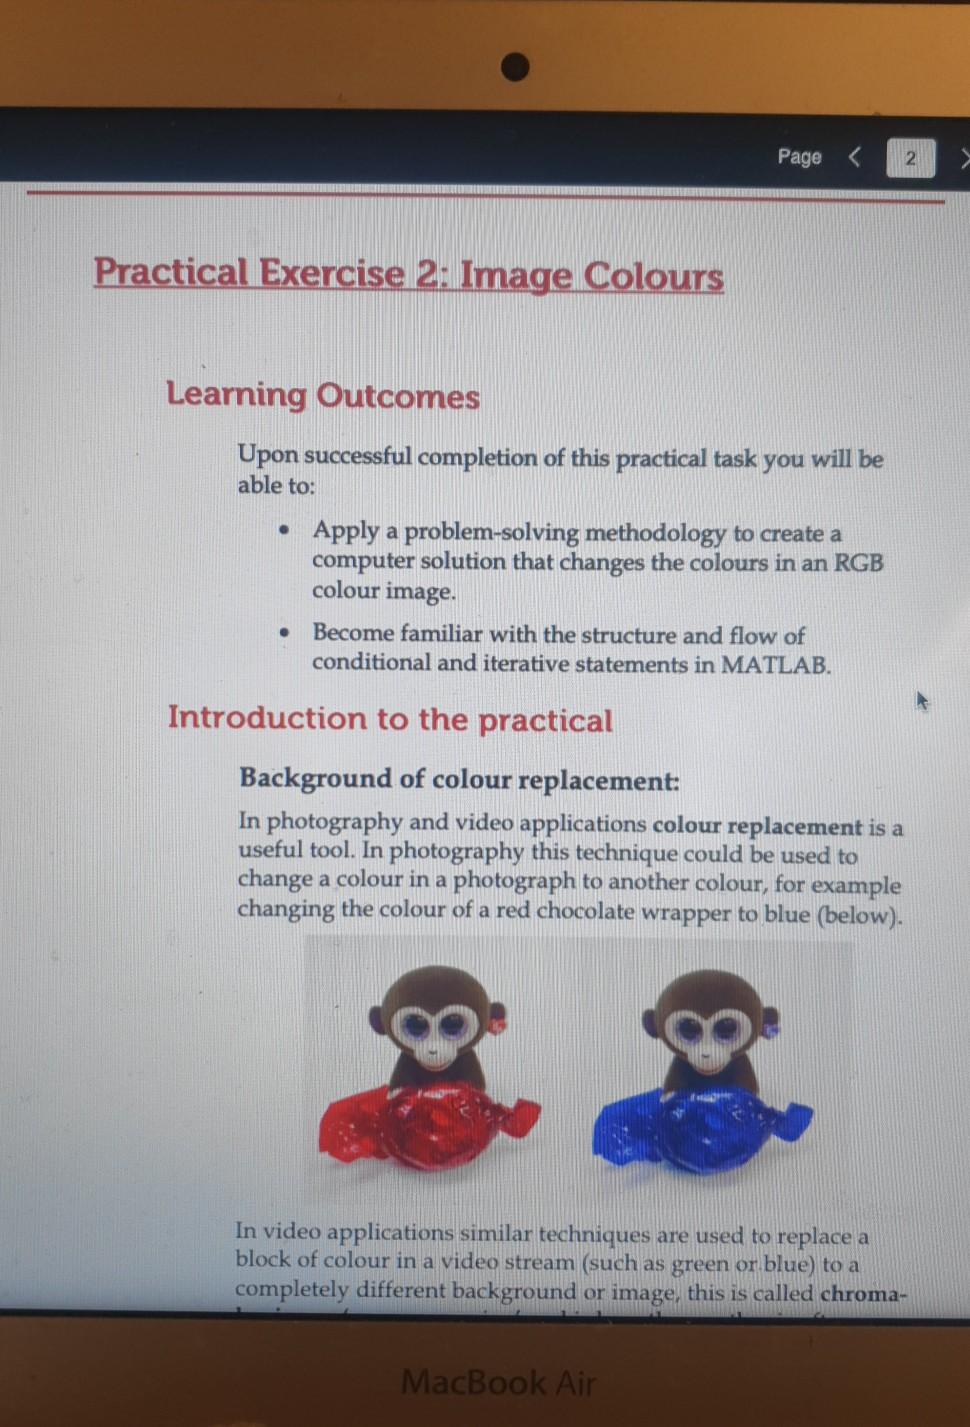 Page <
2
Practical Exercise 2: Image Colours
Learning Outcomes
Upon successful completion of this practical task you will be